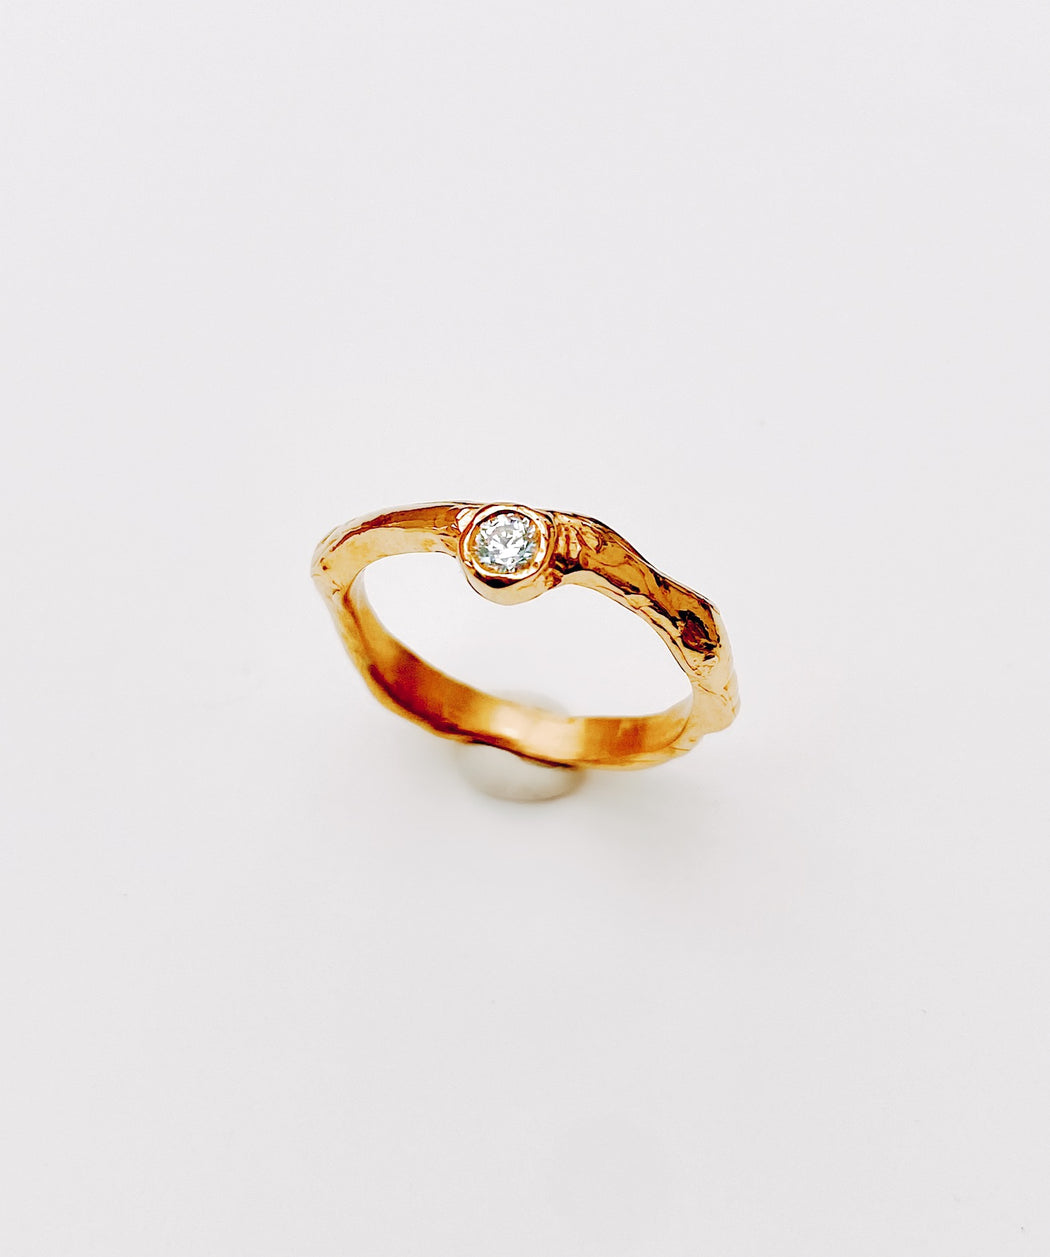 Ring 18k gold with diamond I